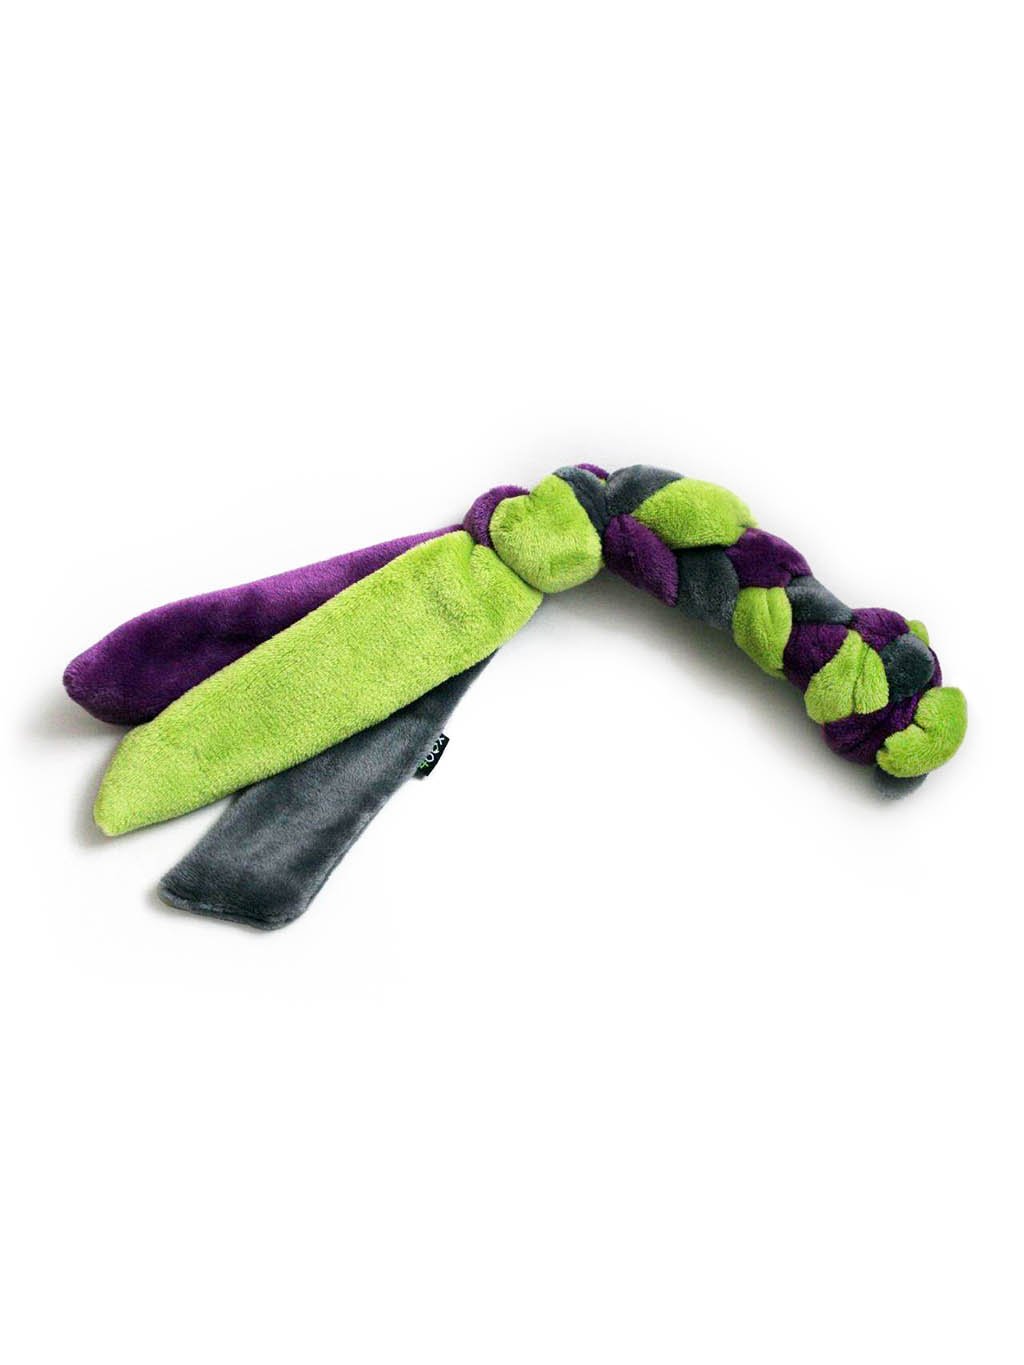 Knitted tug toy - lime/purple